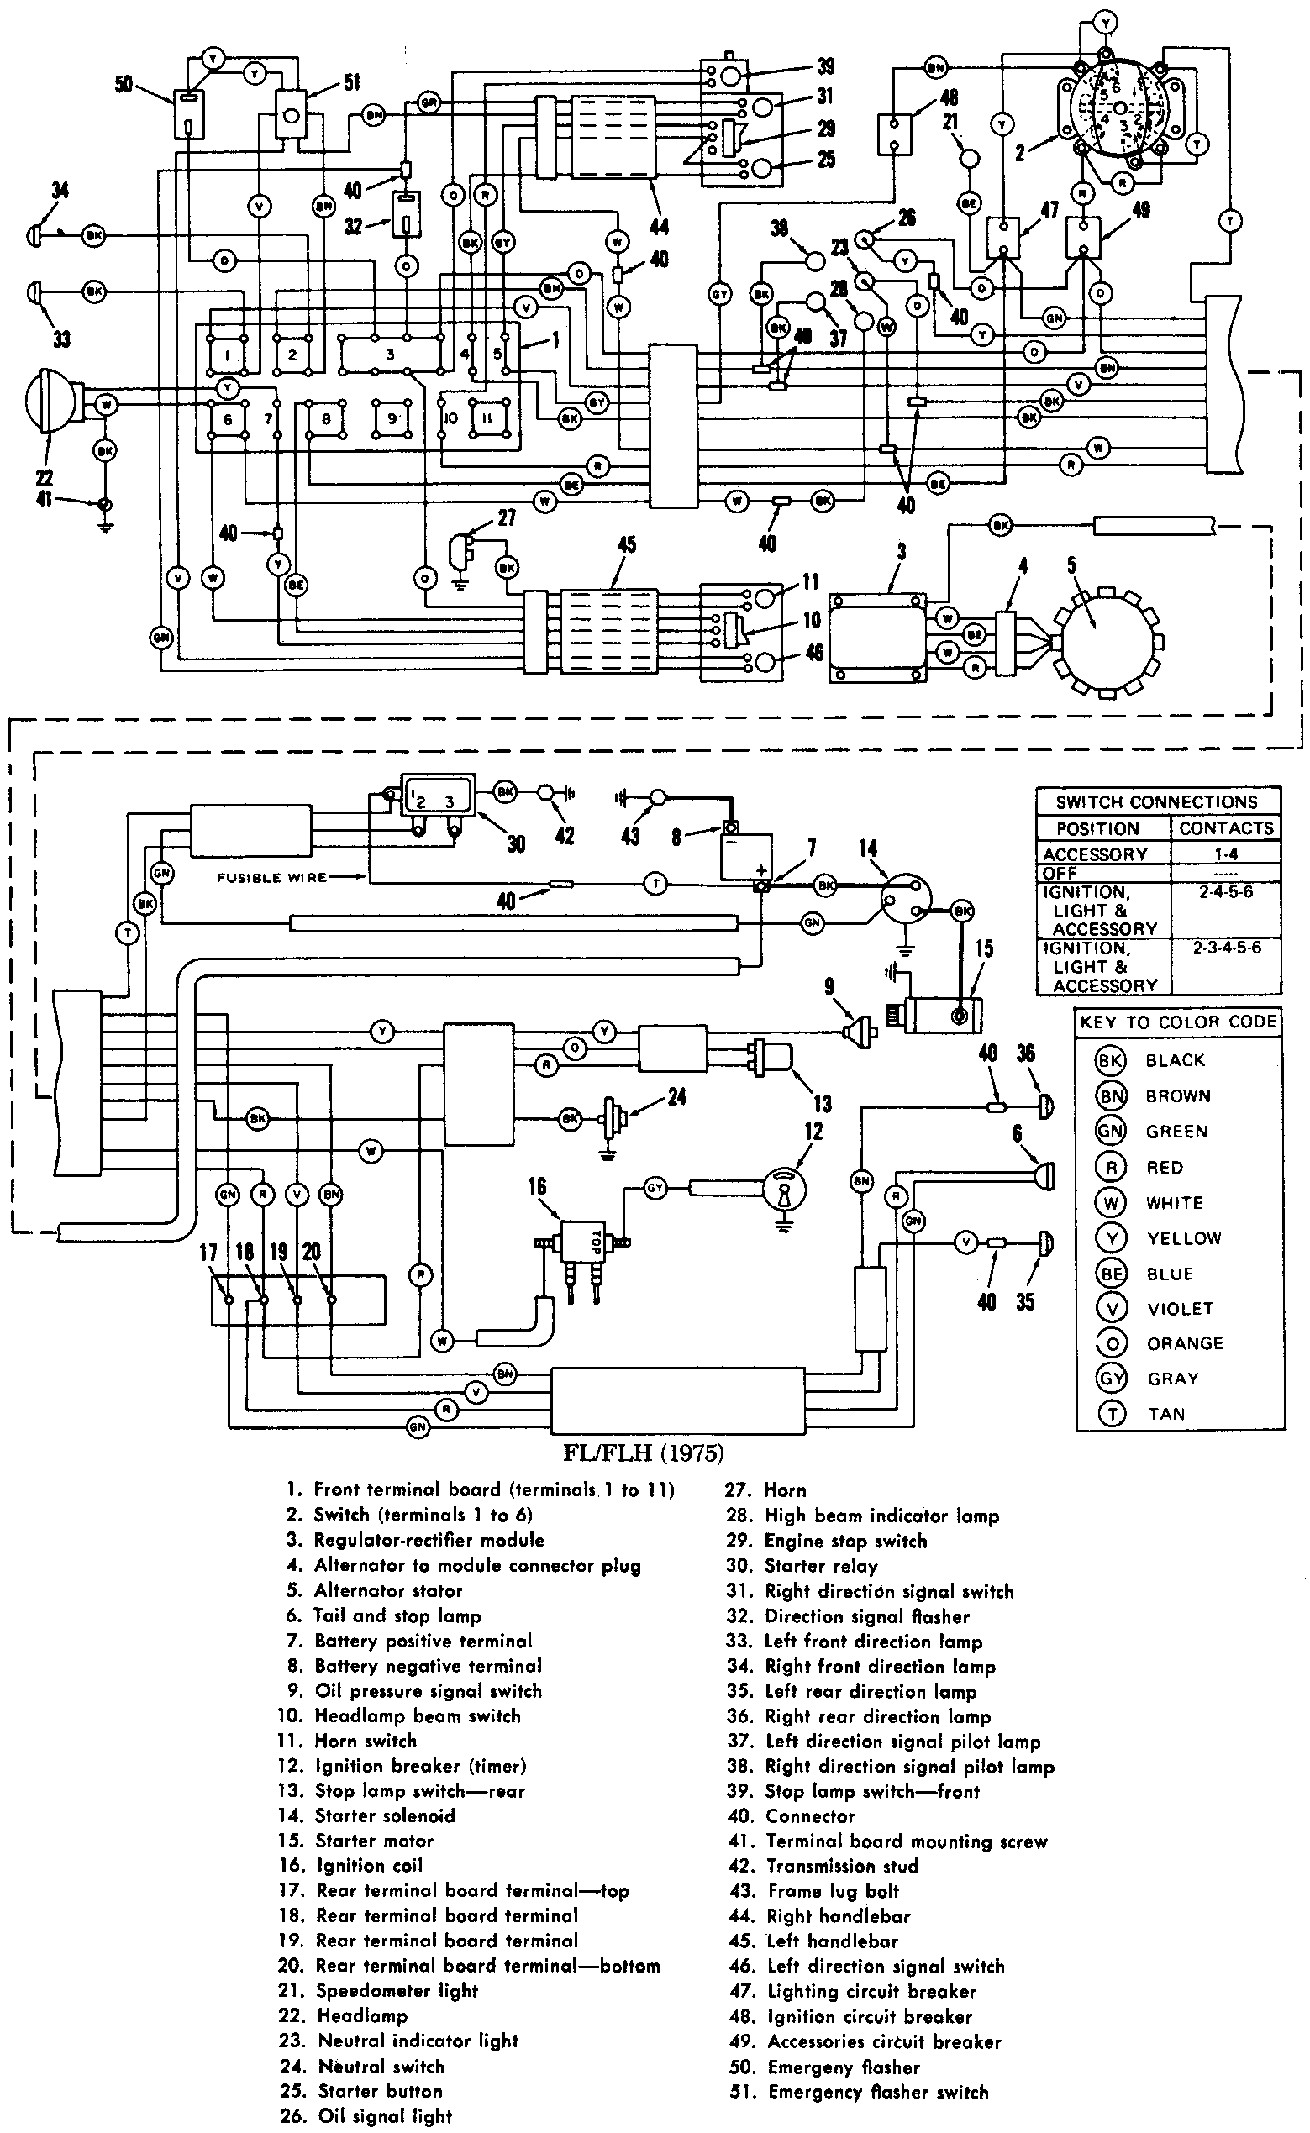 Collection Solutions 2001 Harley Dyna Wiring Diagram Wiring Diagrams With Additional 1979 Harley Davidson